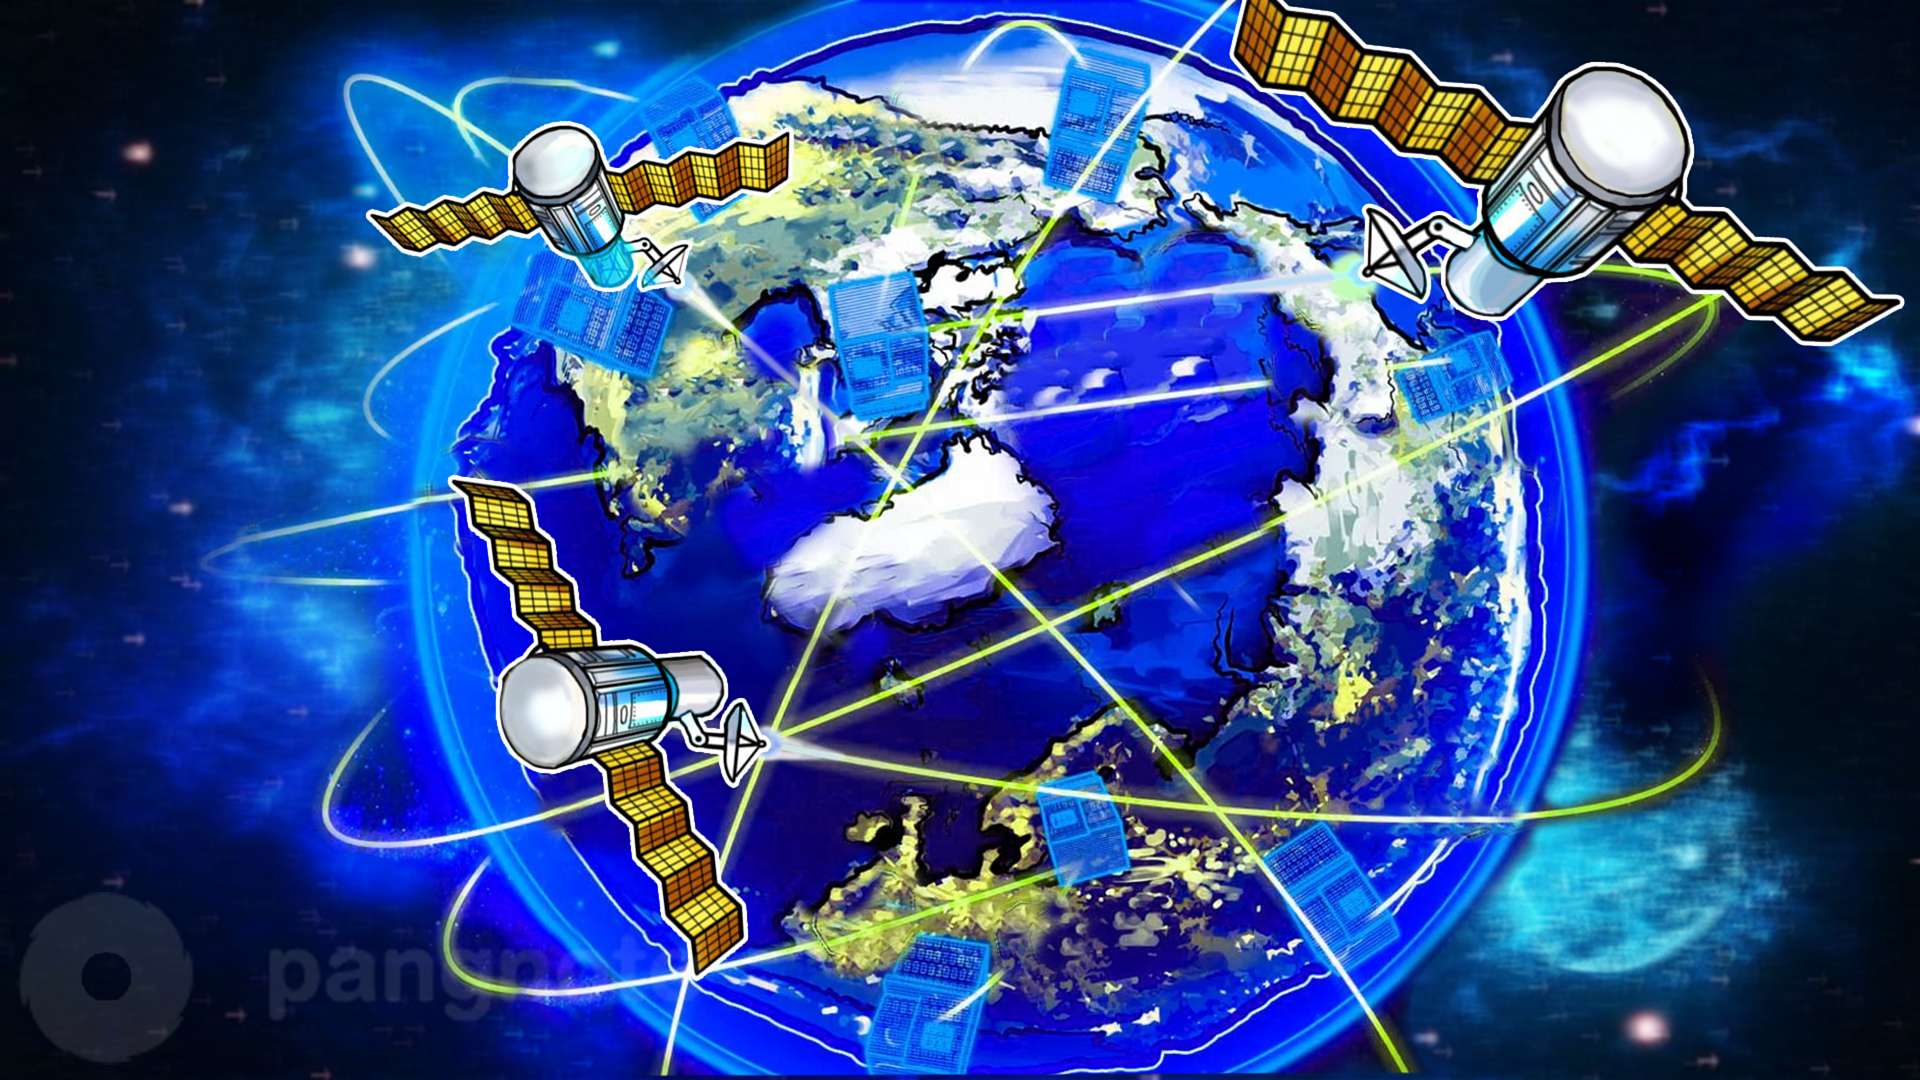 To create a global network it is proposed to use space lasers